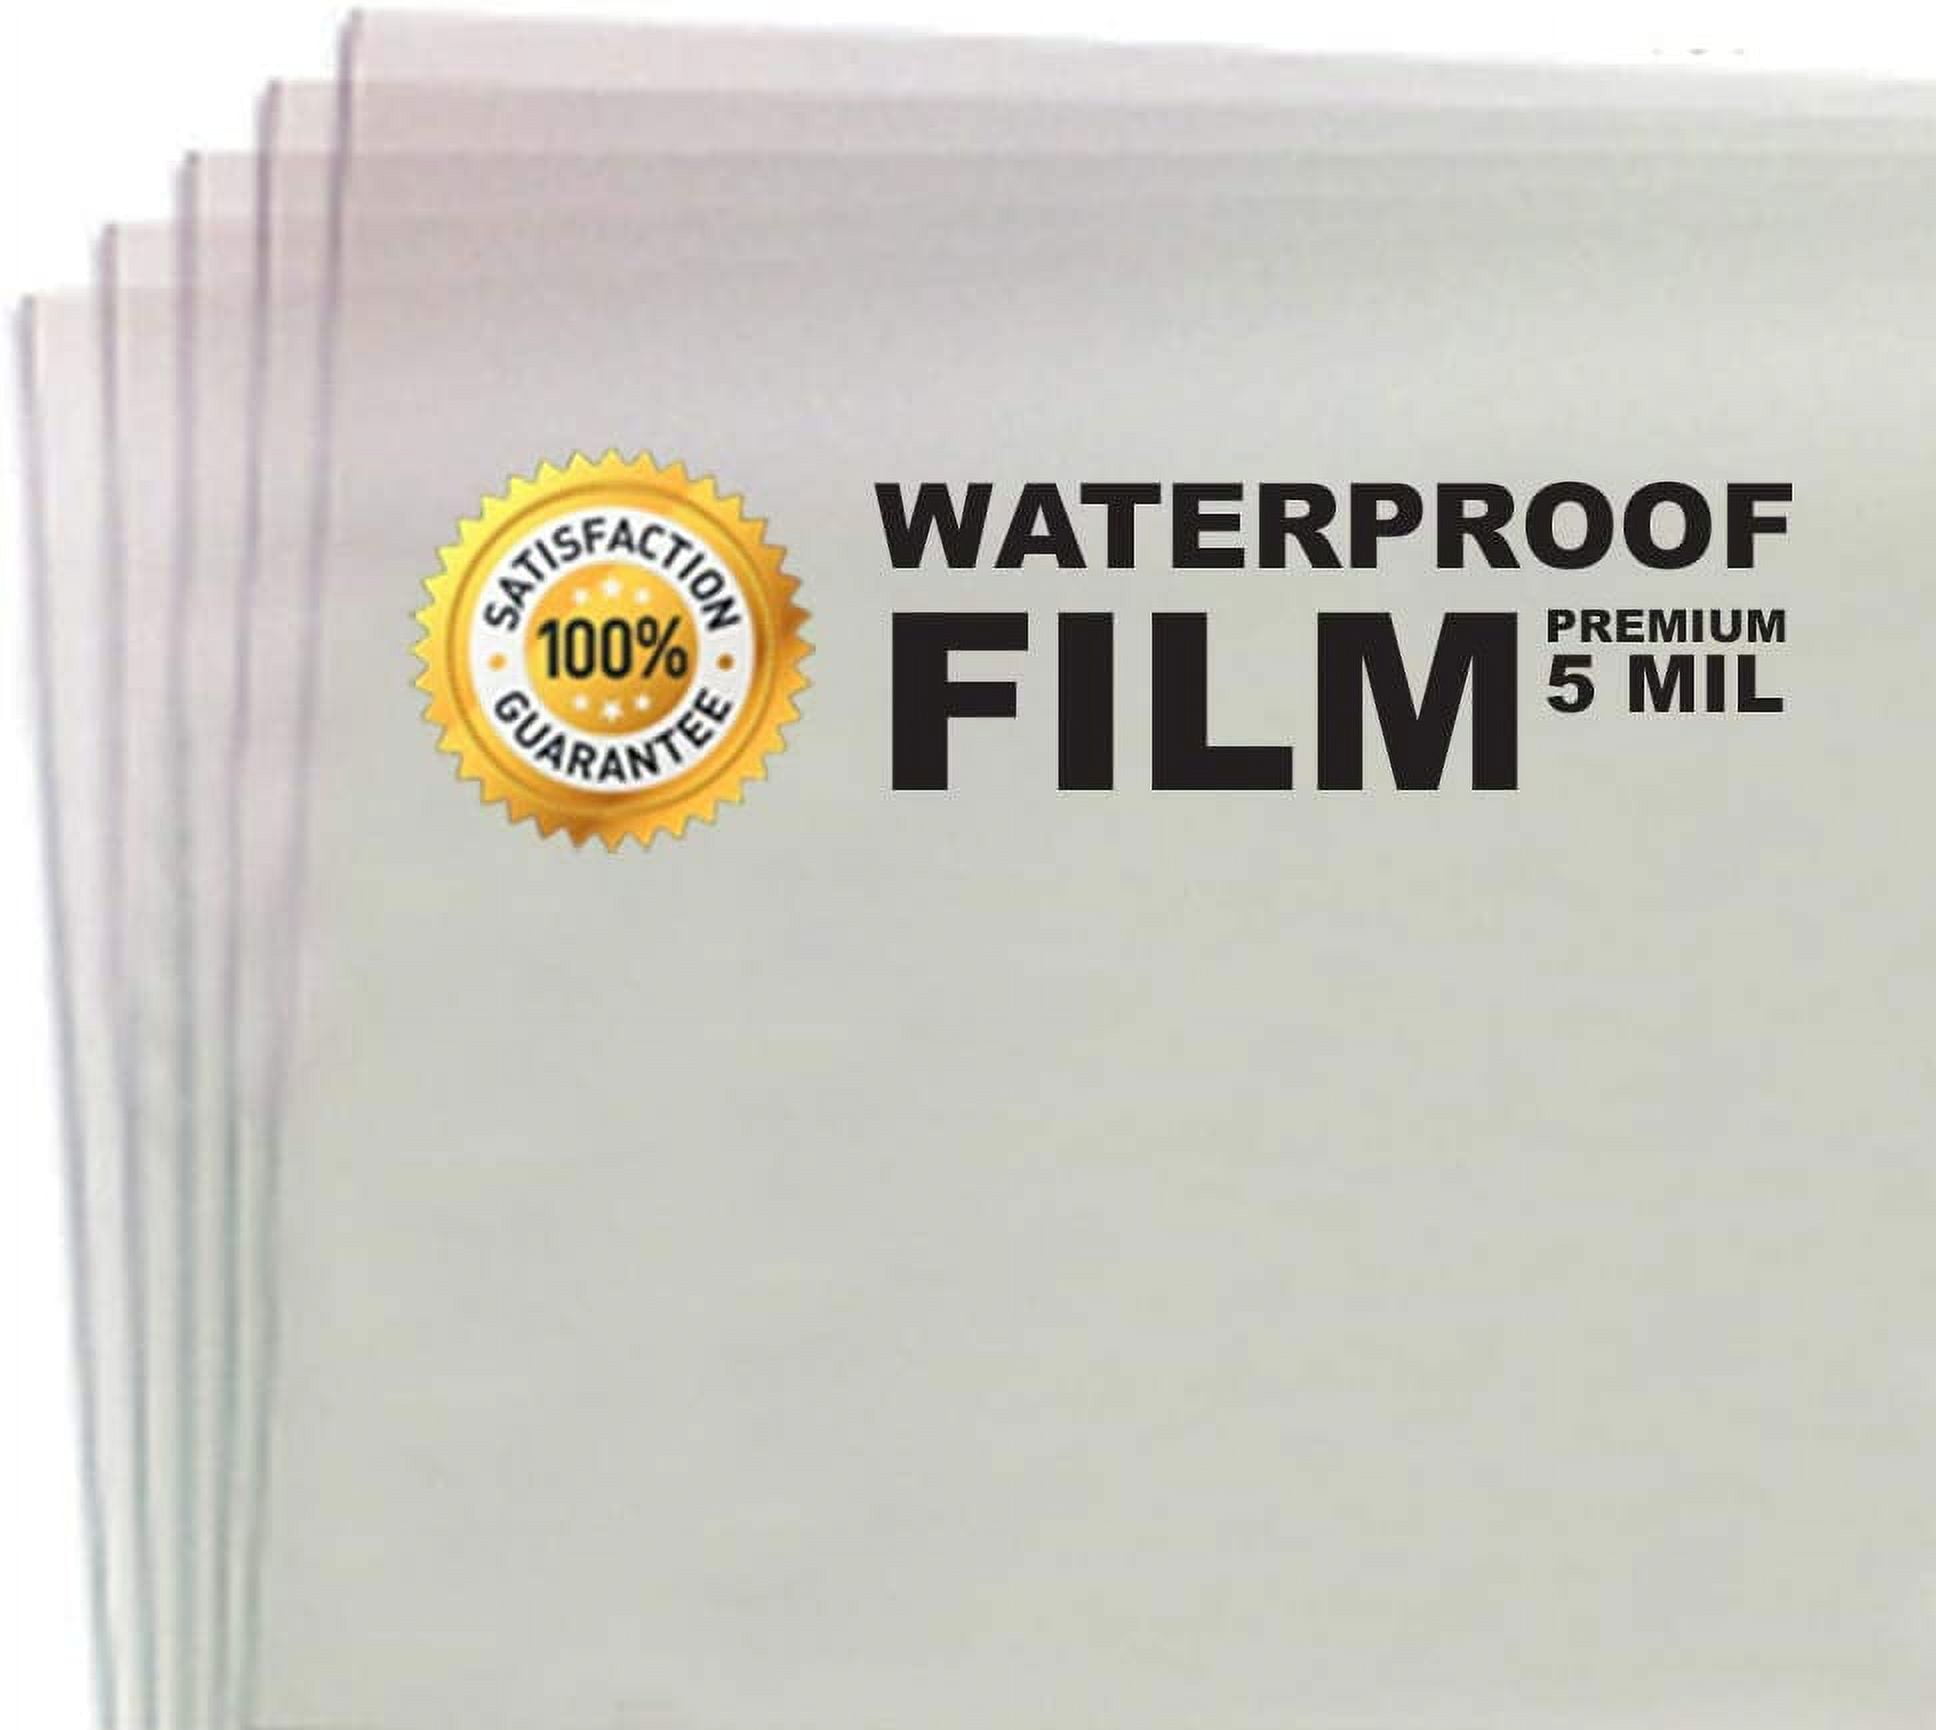 5 Mil Waterproof Screen Printing Inkjet Film Transparency Sheets Cut Sheets 4 Pack Total of 400 Sheets 17 inch x 22 inch, Size: 17 x 22